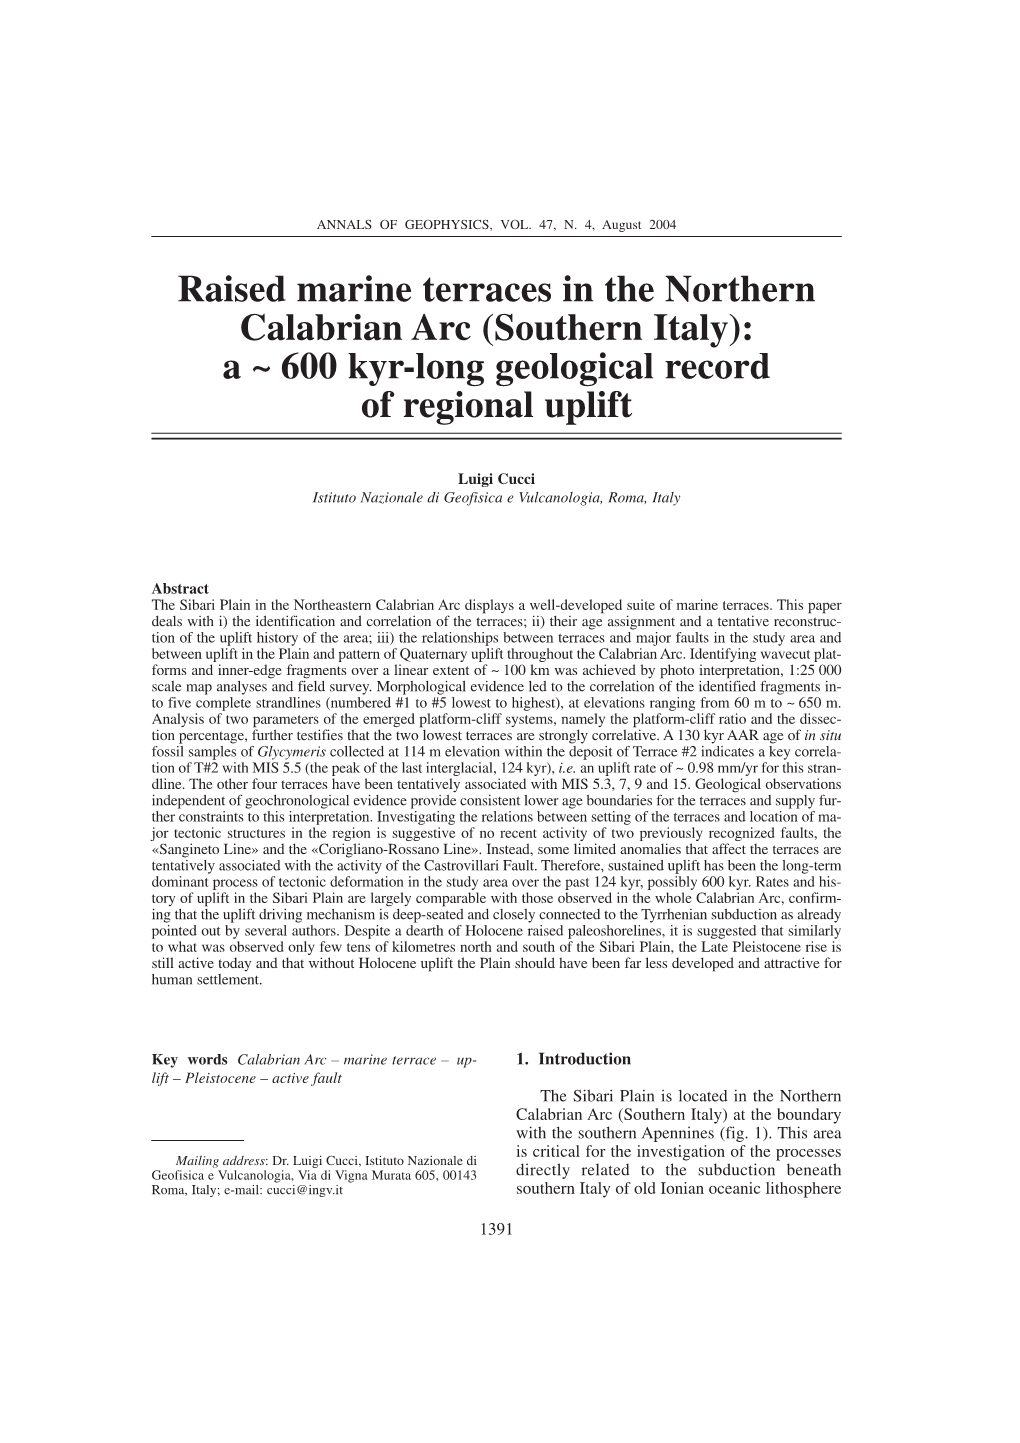 Raised Marine Terraces in the Northern Calabrian Arc (Southern Italy): a ~ 600 Kyr-Long Geological Record of Regional Uplift